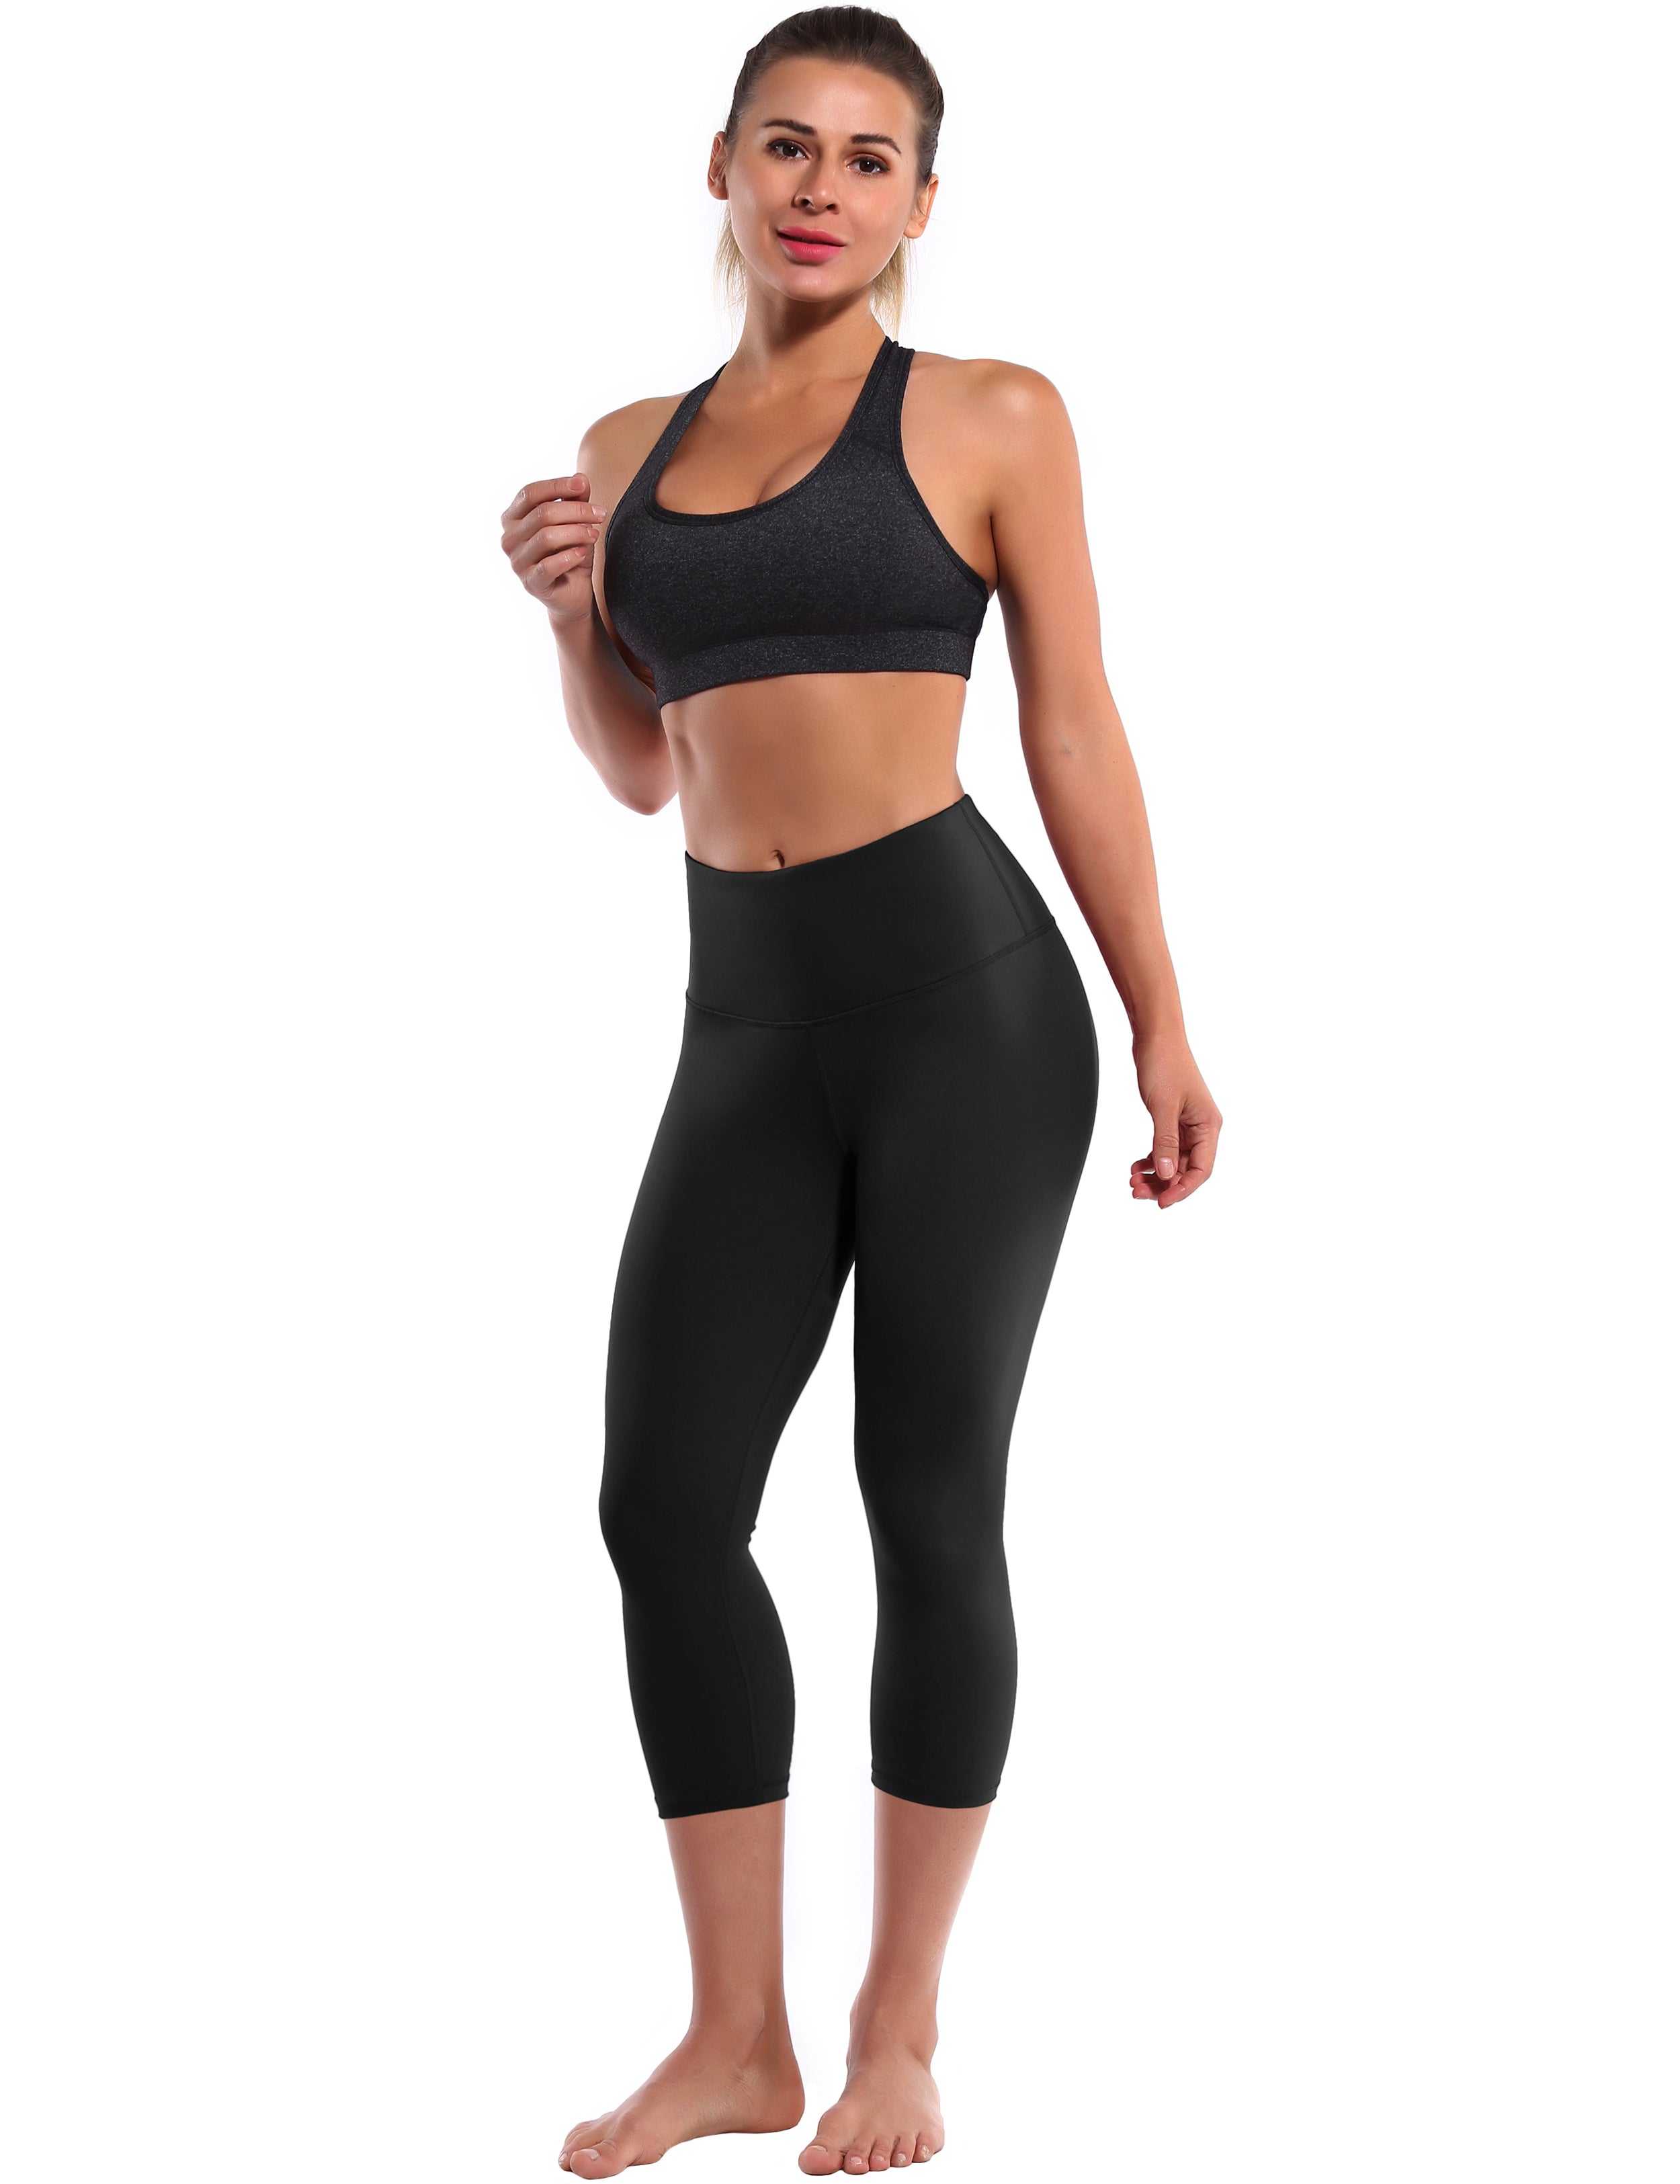 19" High Waist Crop Tight Capris black 75%Nylon/25%Spandex Fabric doesn't attract lint easily 4-way stretch No see-through Moisture-wicking Tummy control Inner pocket